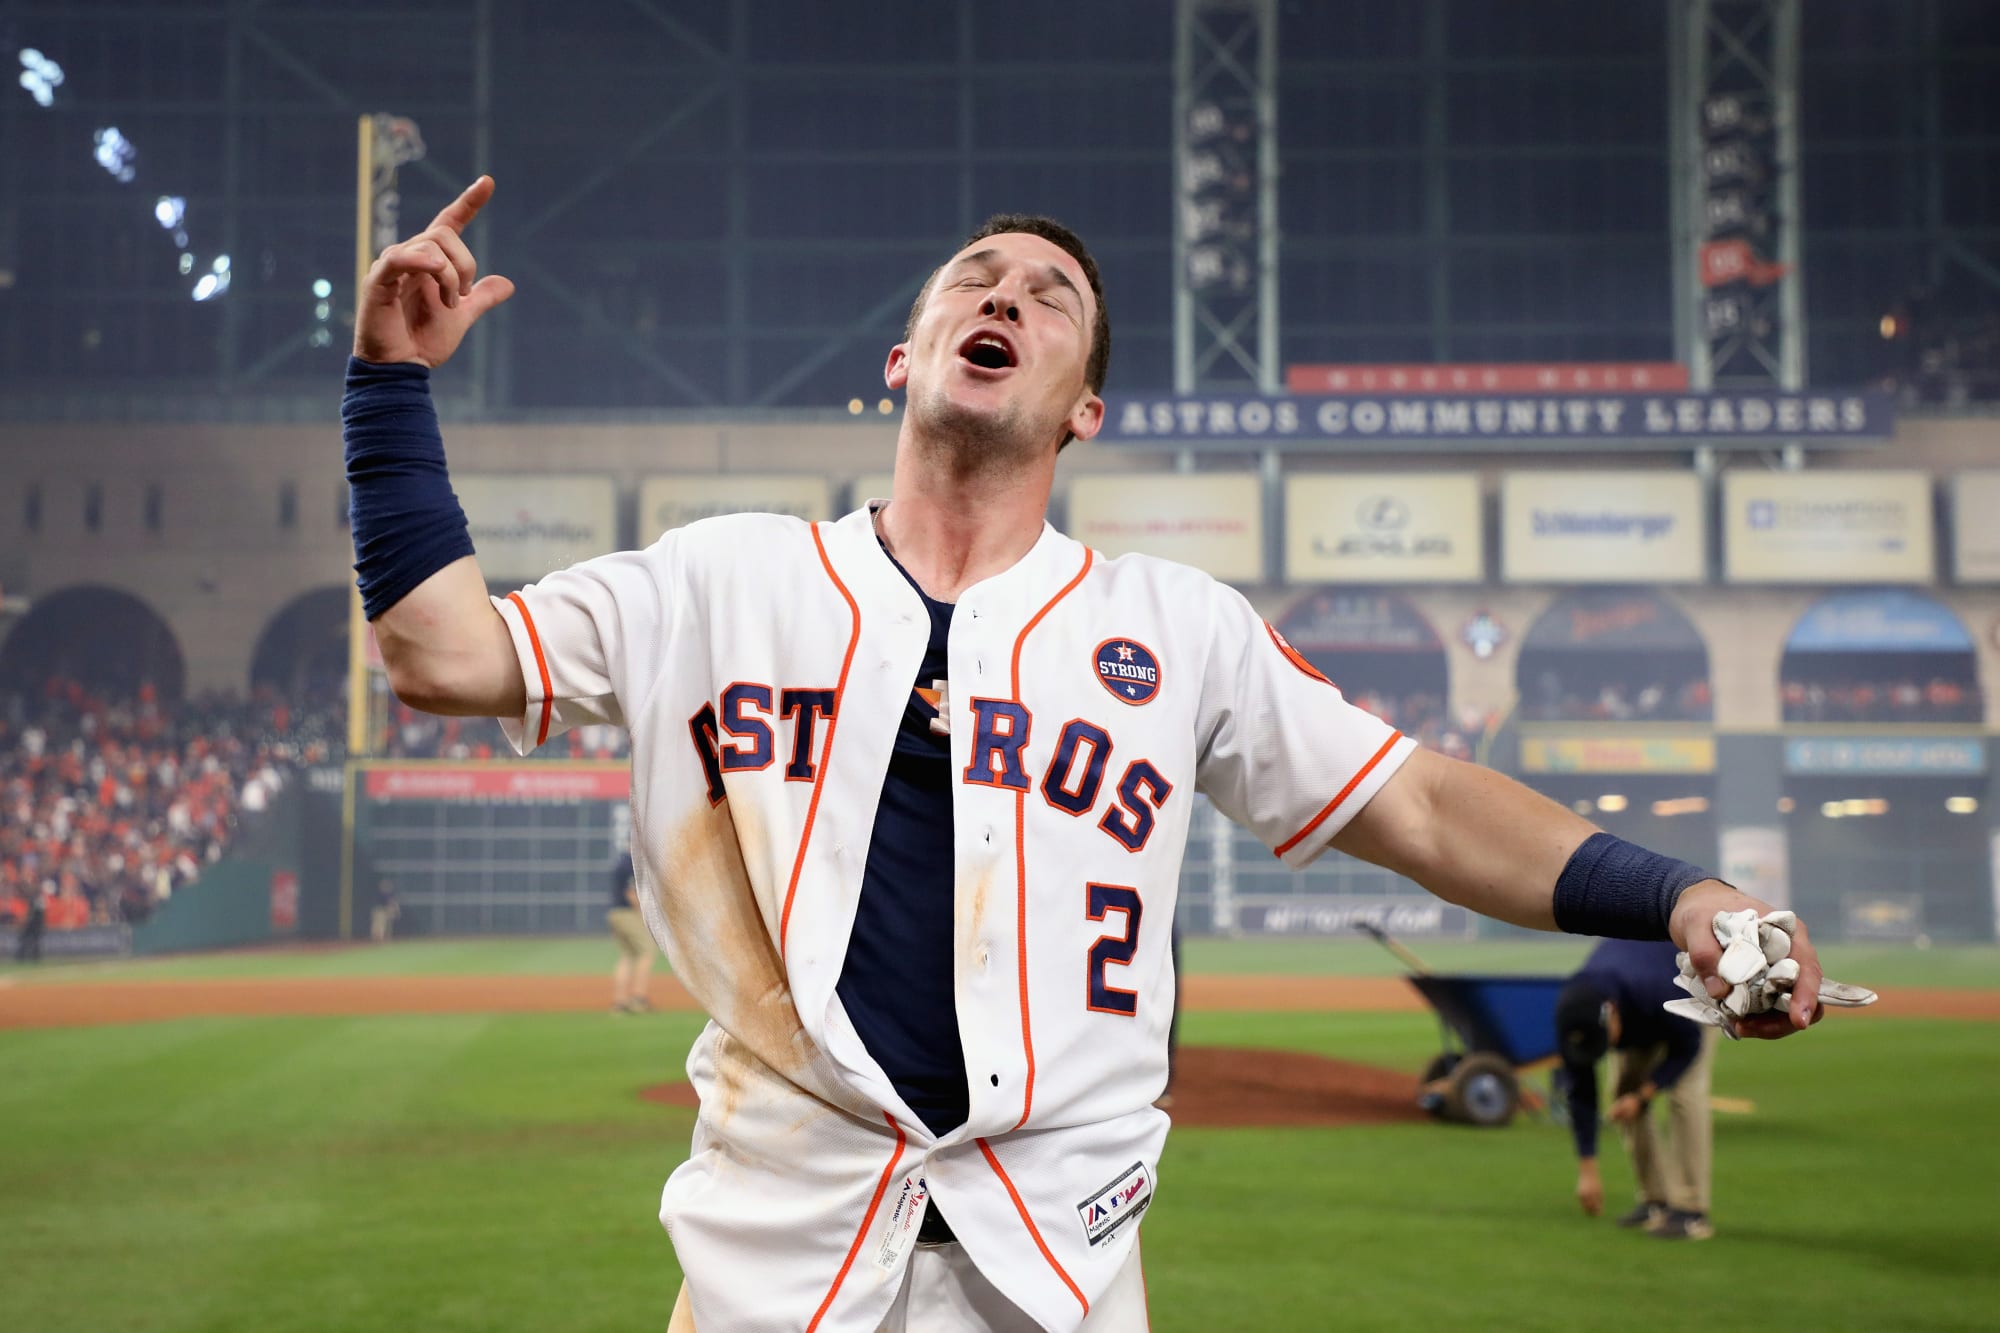 Houston Astros fans amazed as Alex Bregman continues his red-hot form in  the World Series as he smashed 2-run HR to put the Astros up 5-0